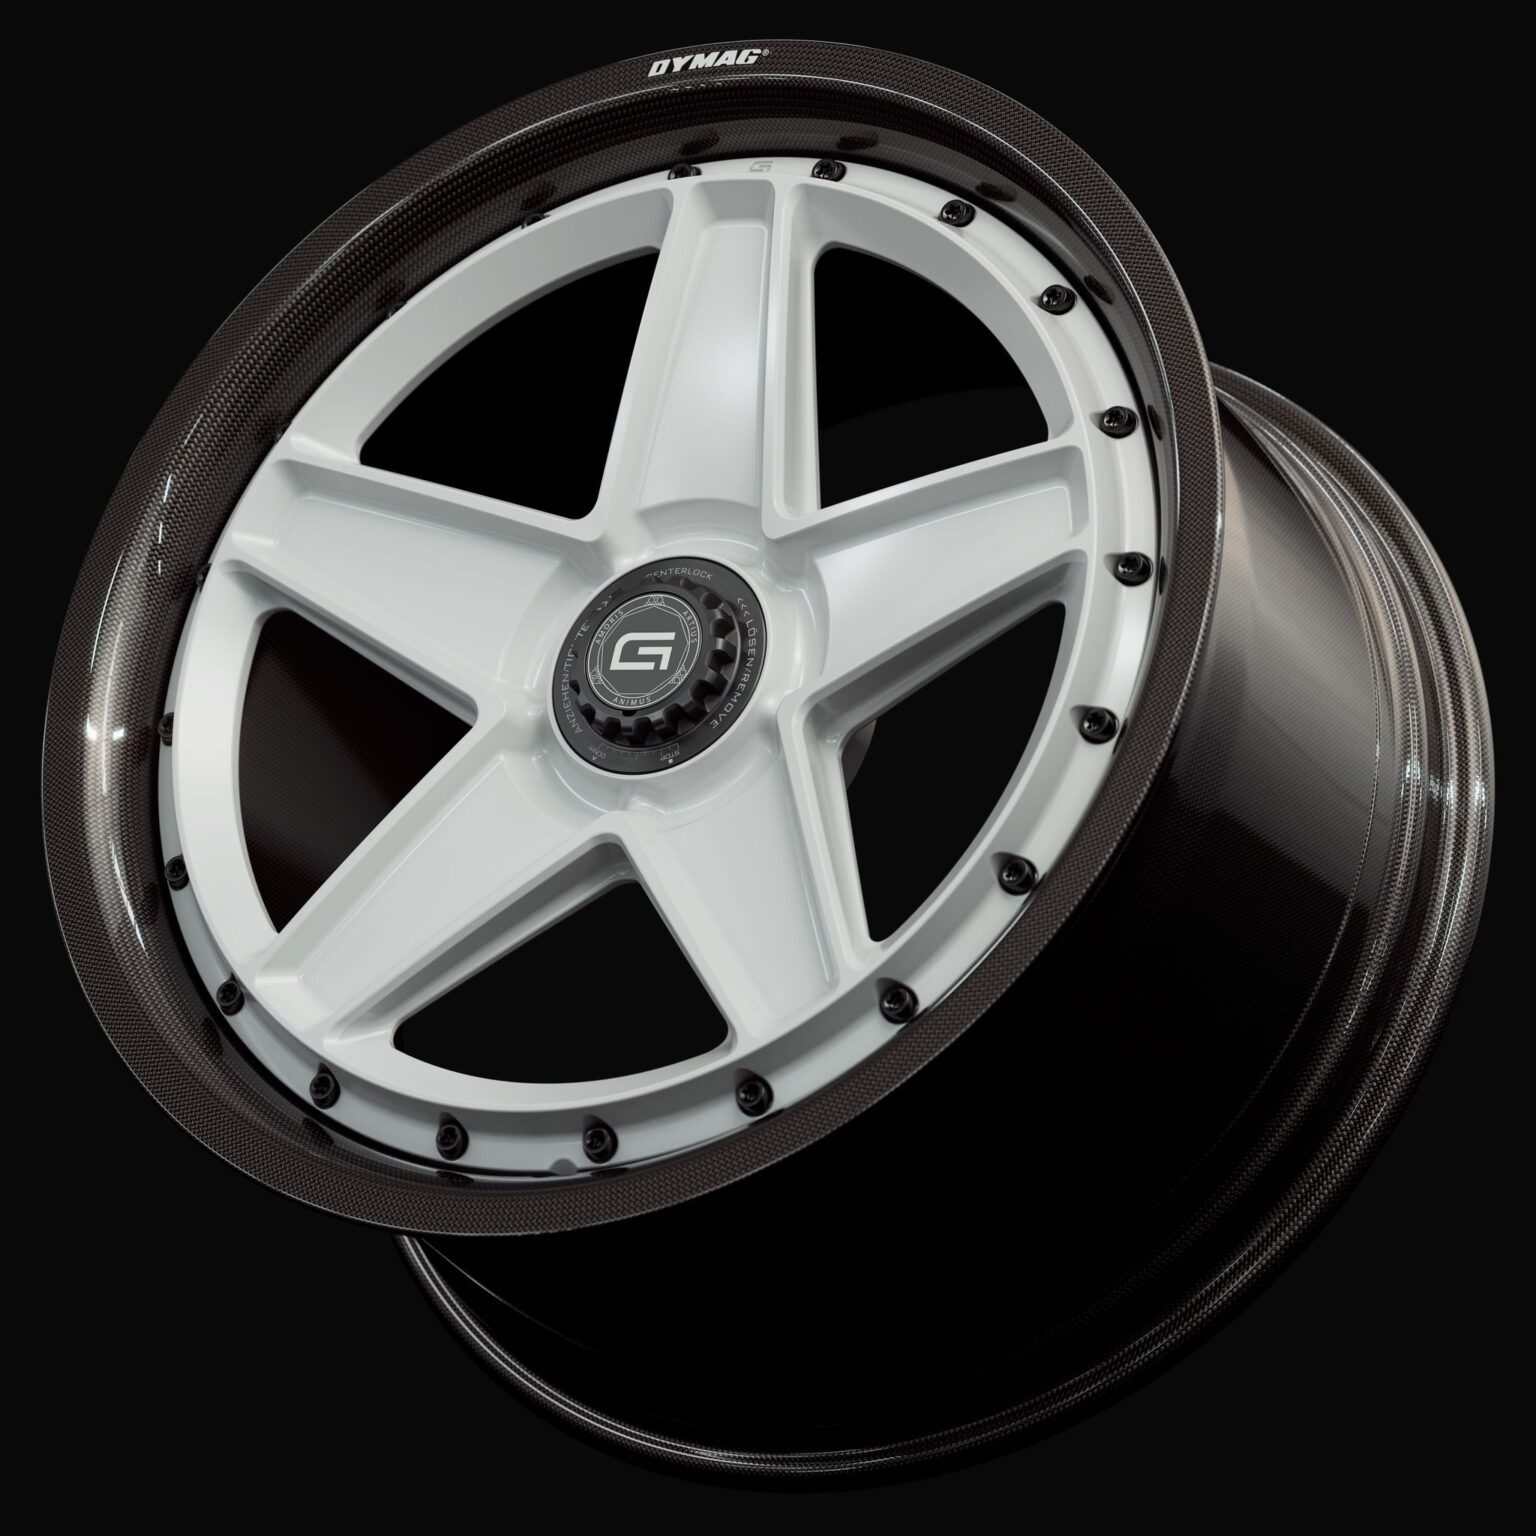 Three-quarter view of a white G25 2-piece centerlock wheel from Govad Forged Carbon8 series with carbon fiber lip